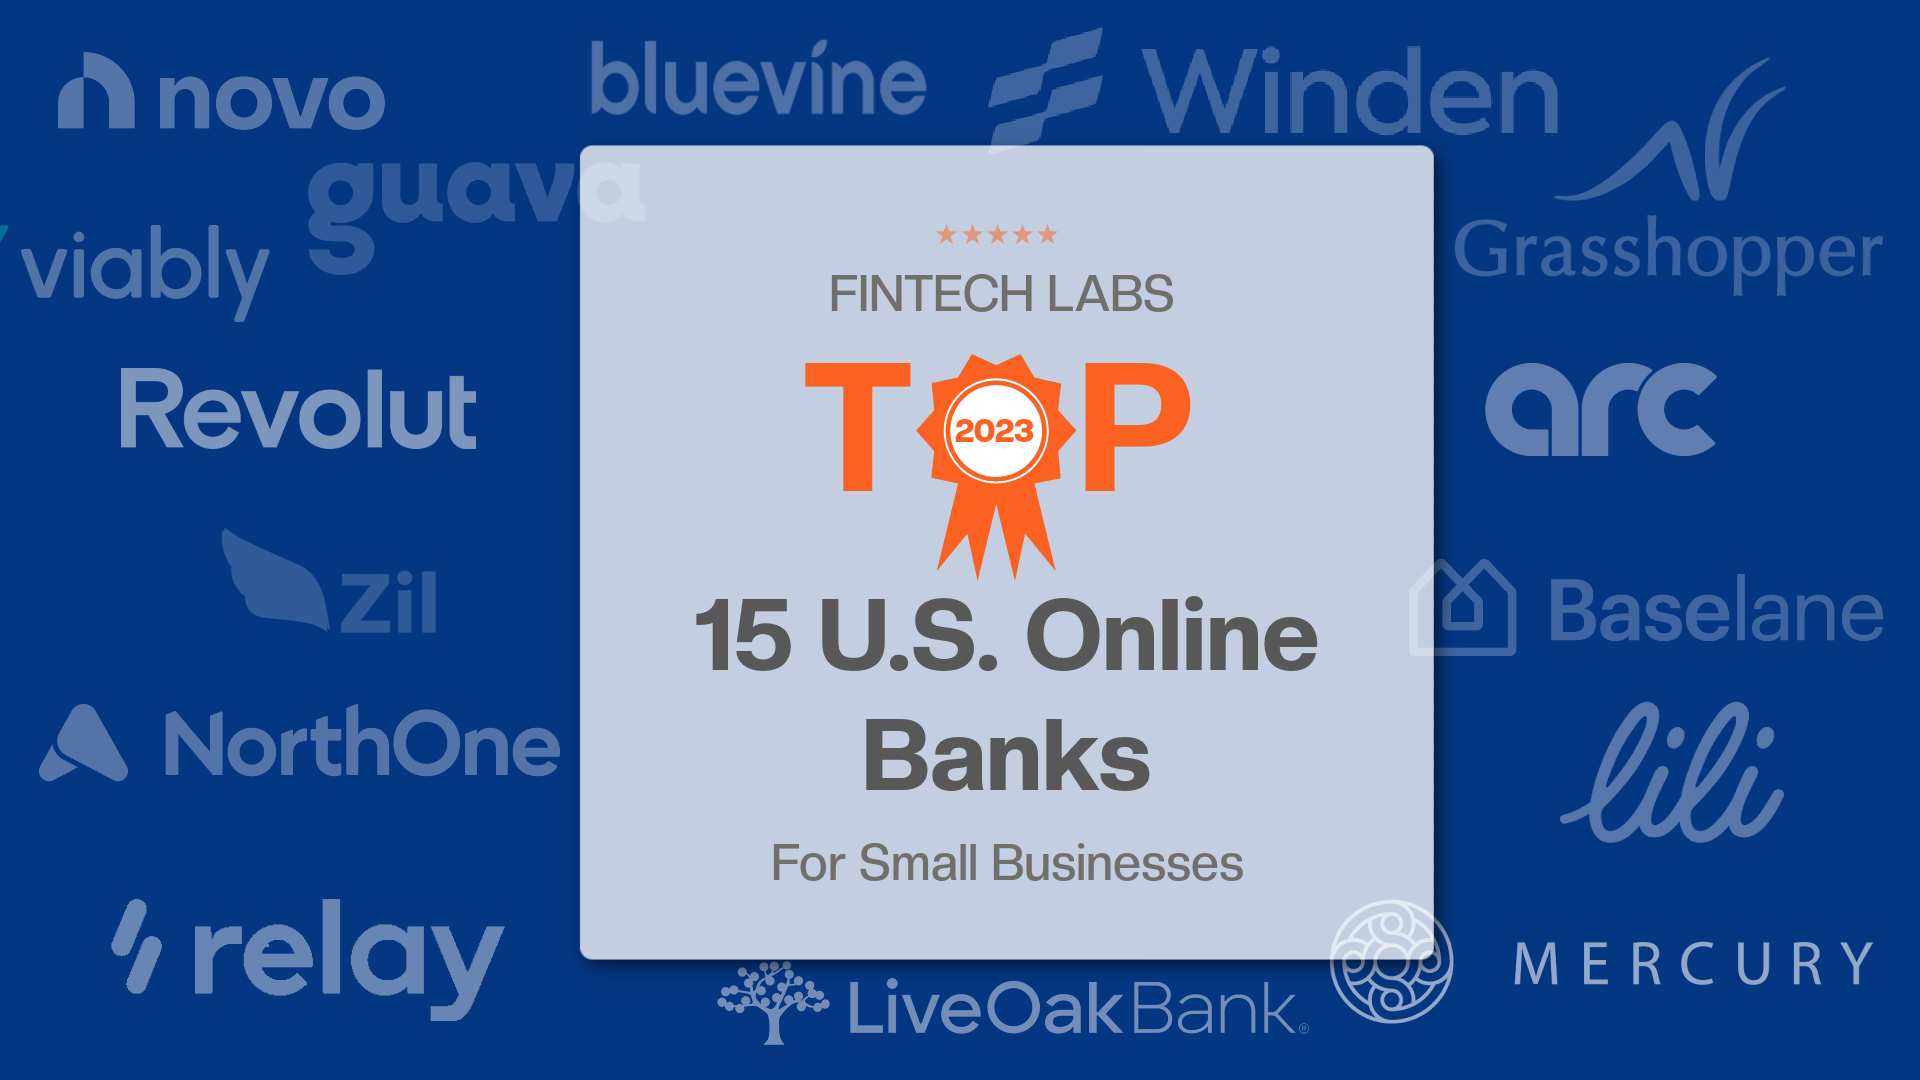 http://fintechlabs.com/wp-content/uploads/2023/04/Top-Banks-Seal_Opt-2.png